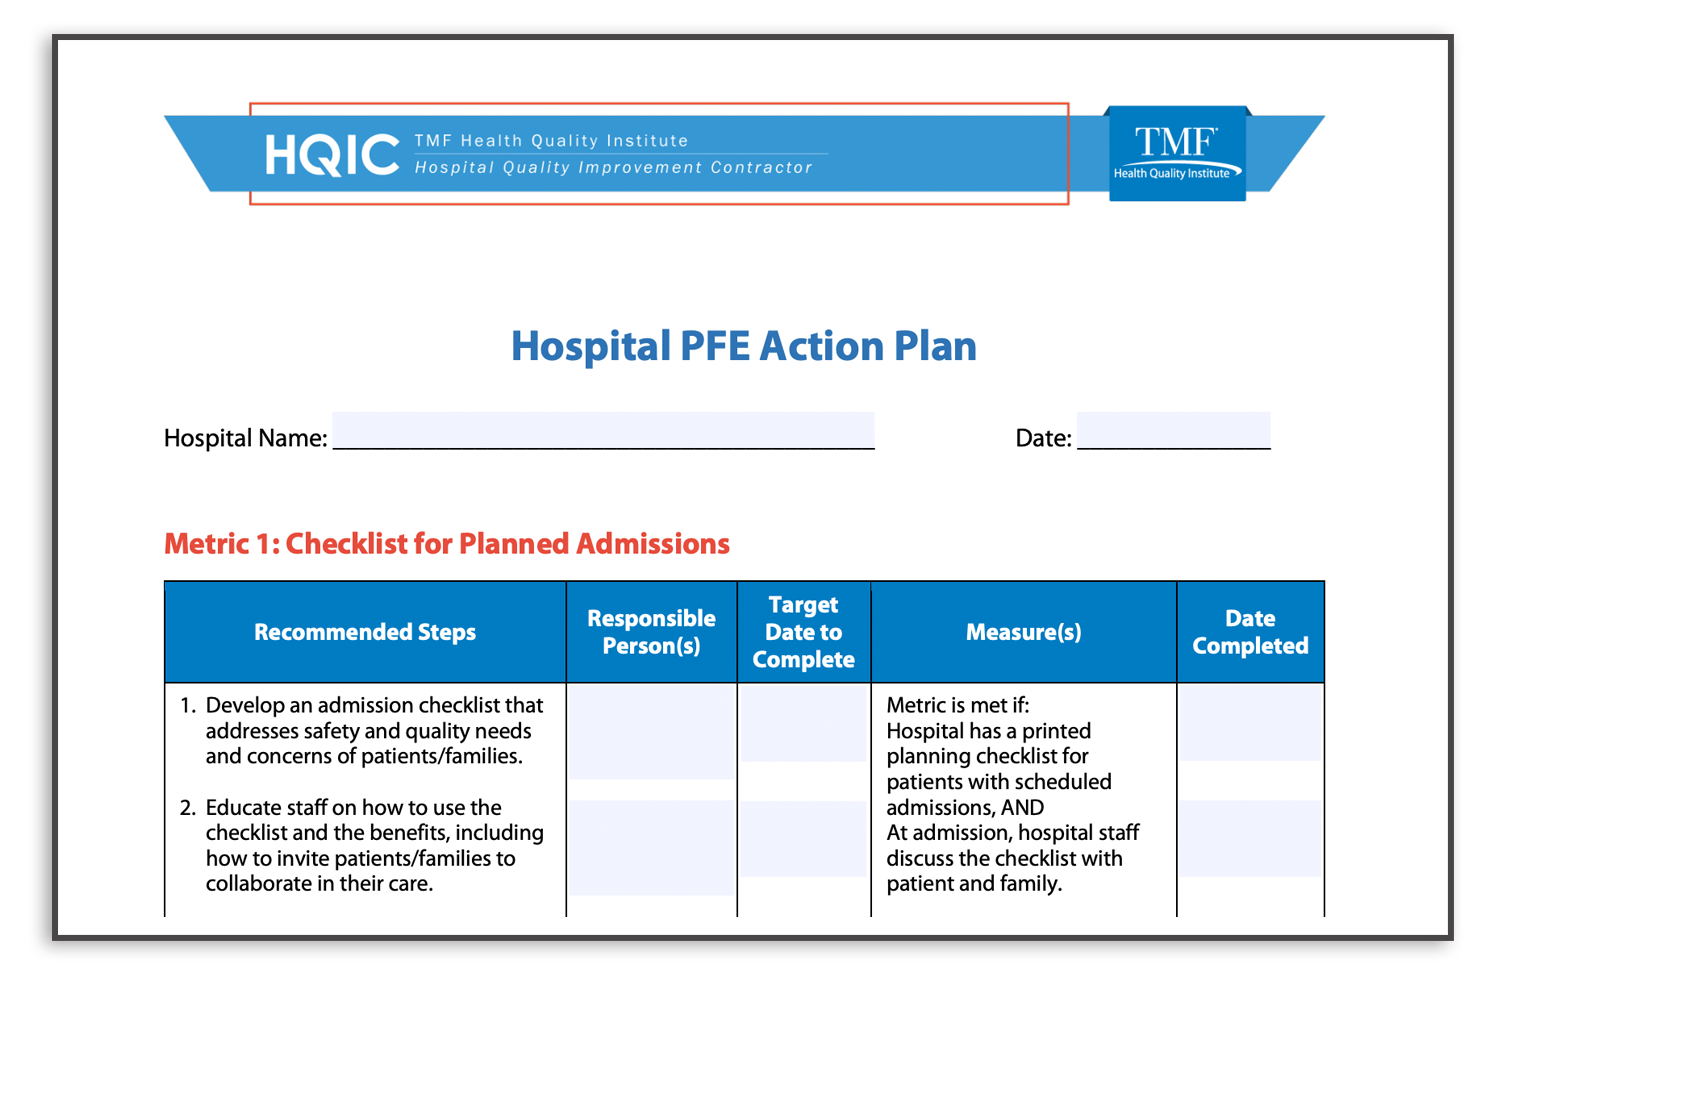 Screenshot of Hospital Person And Family Engagement Action Plan